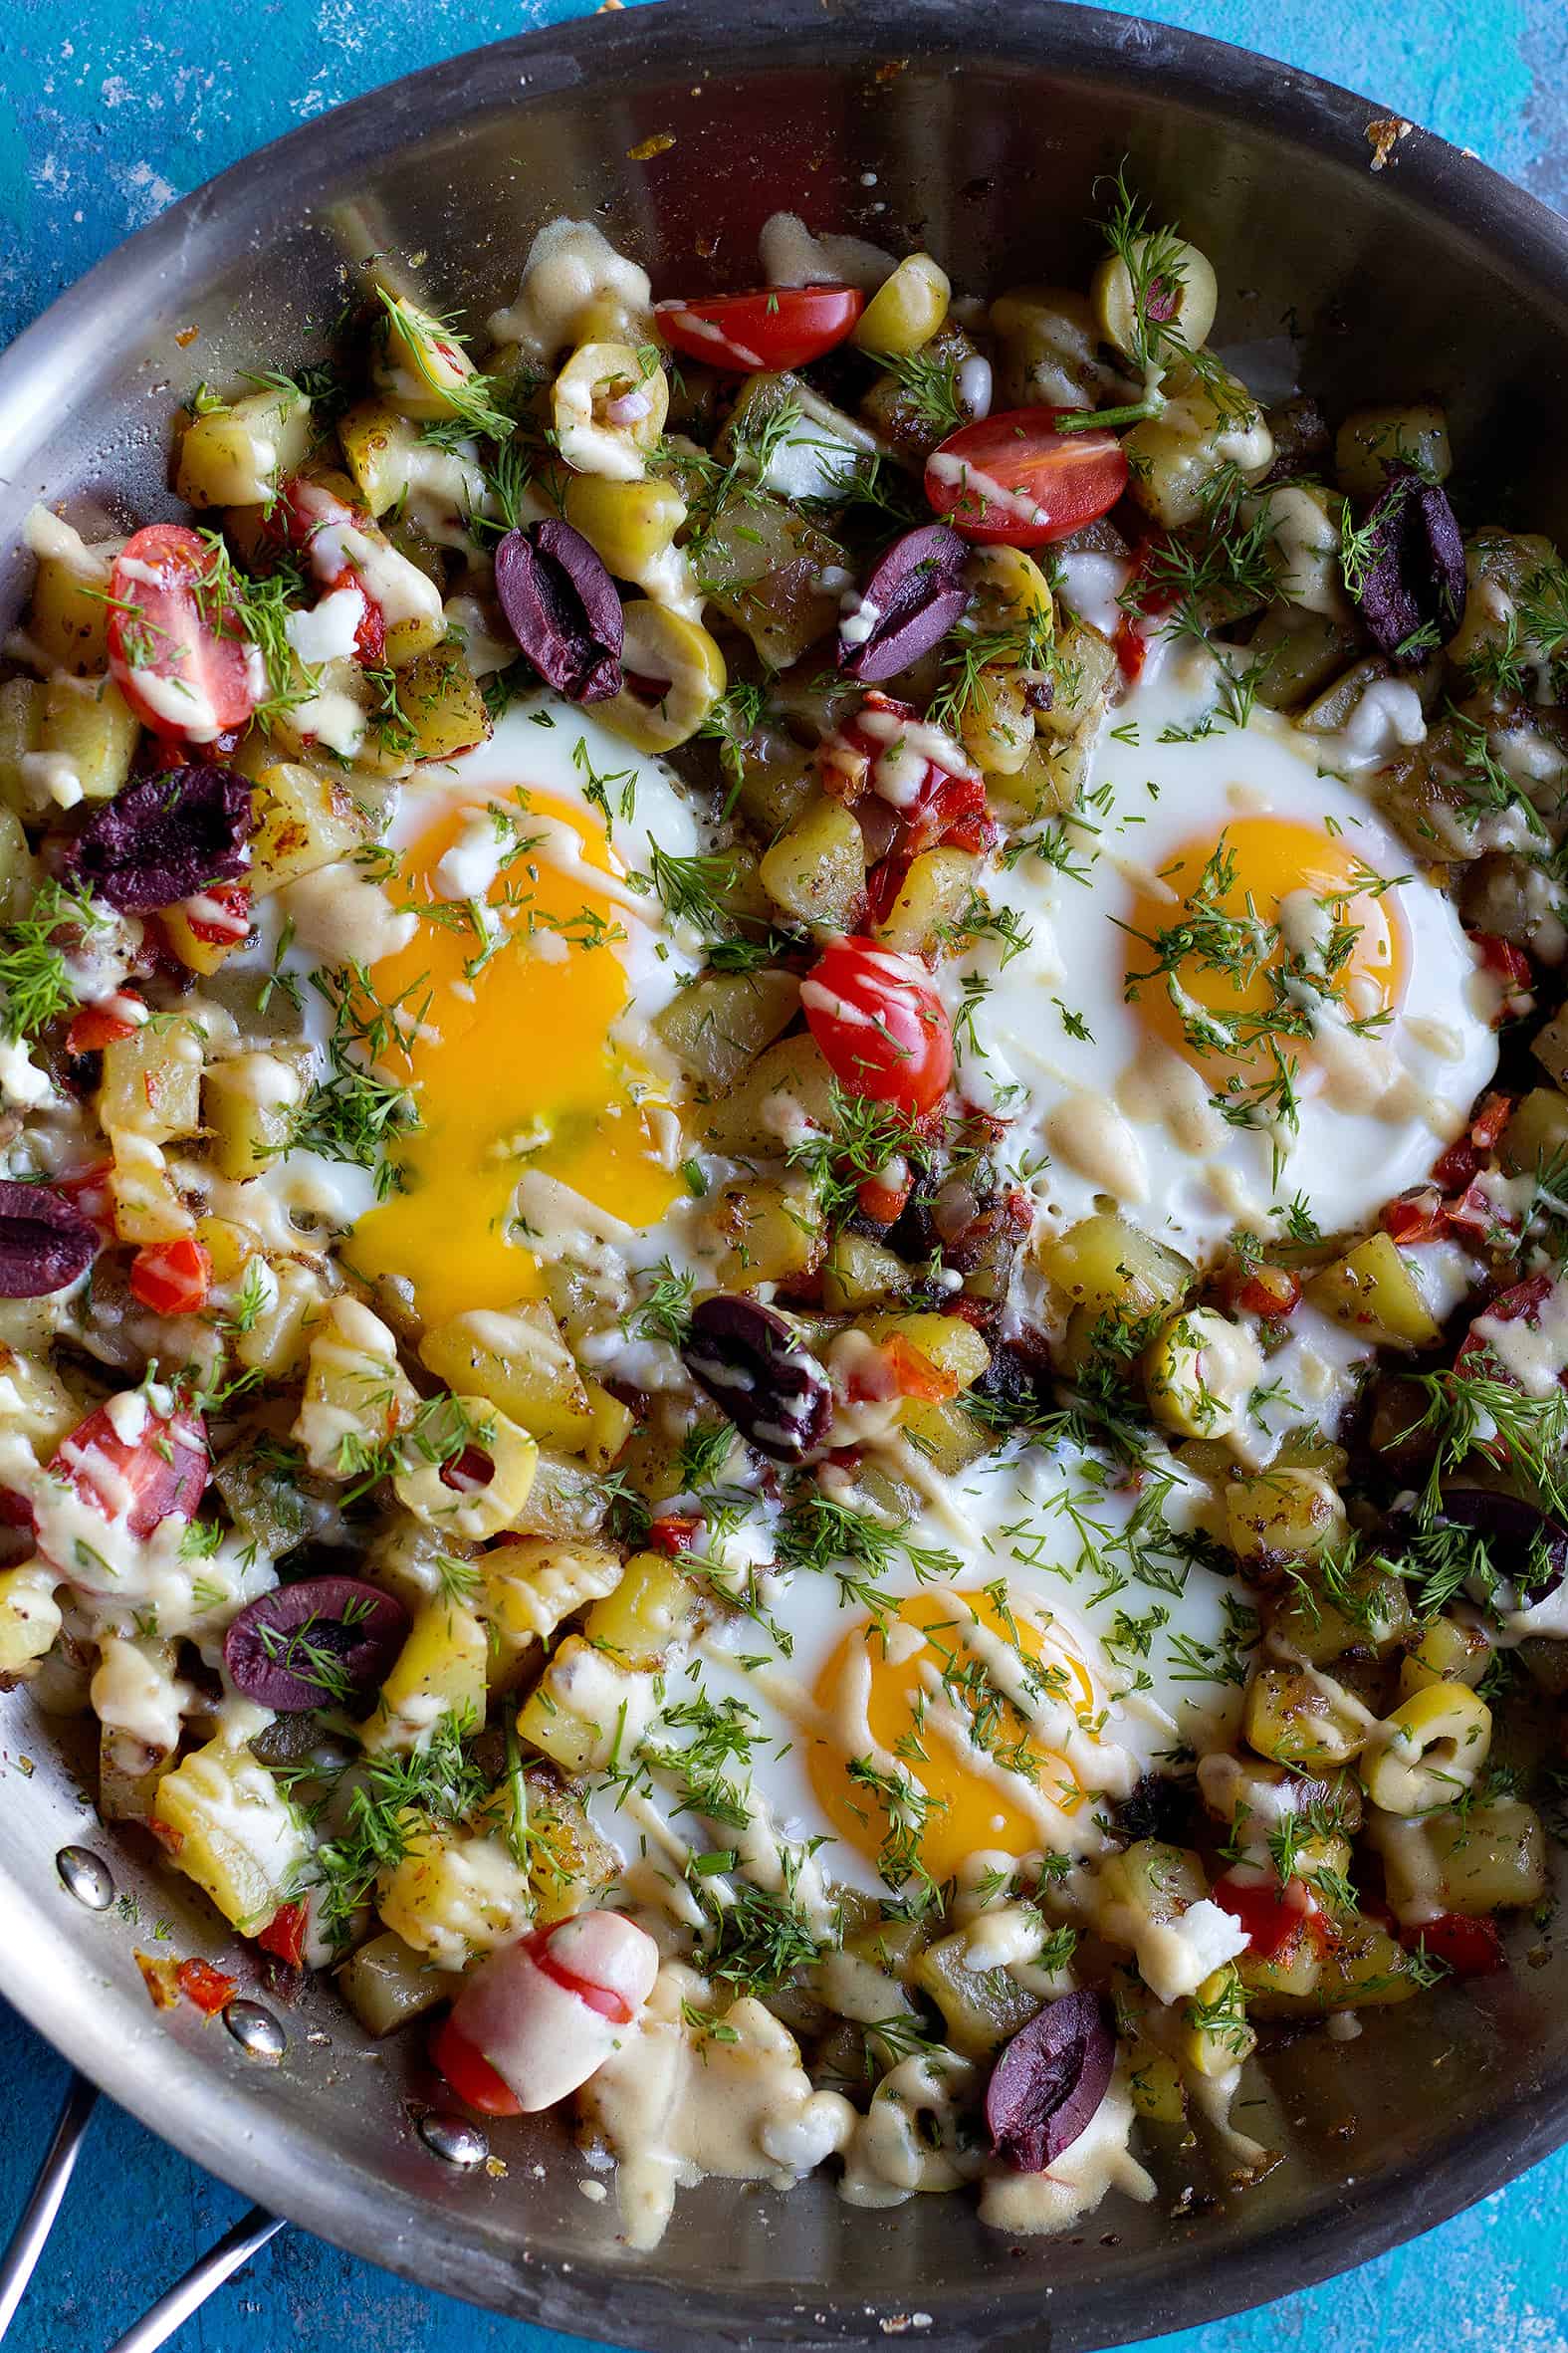 This is an easy potato hash recipe that works well for breakfast and brunch. Make this easy breakfast hash recipe using just a few ingredients.